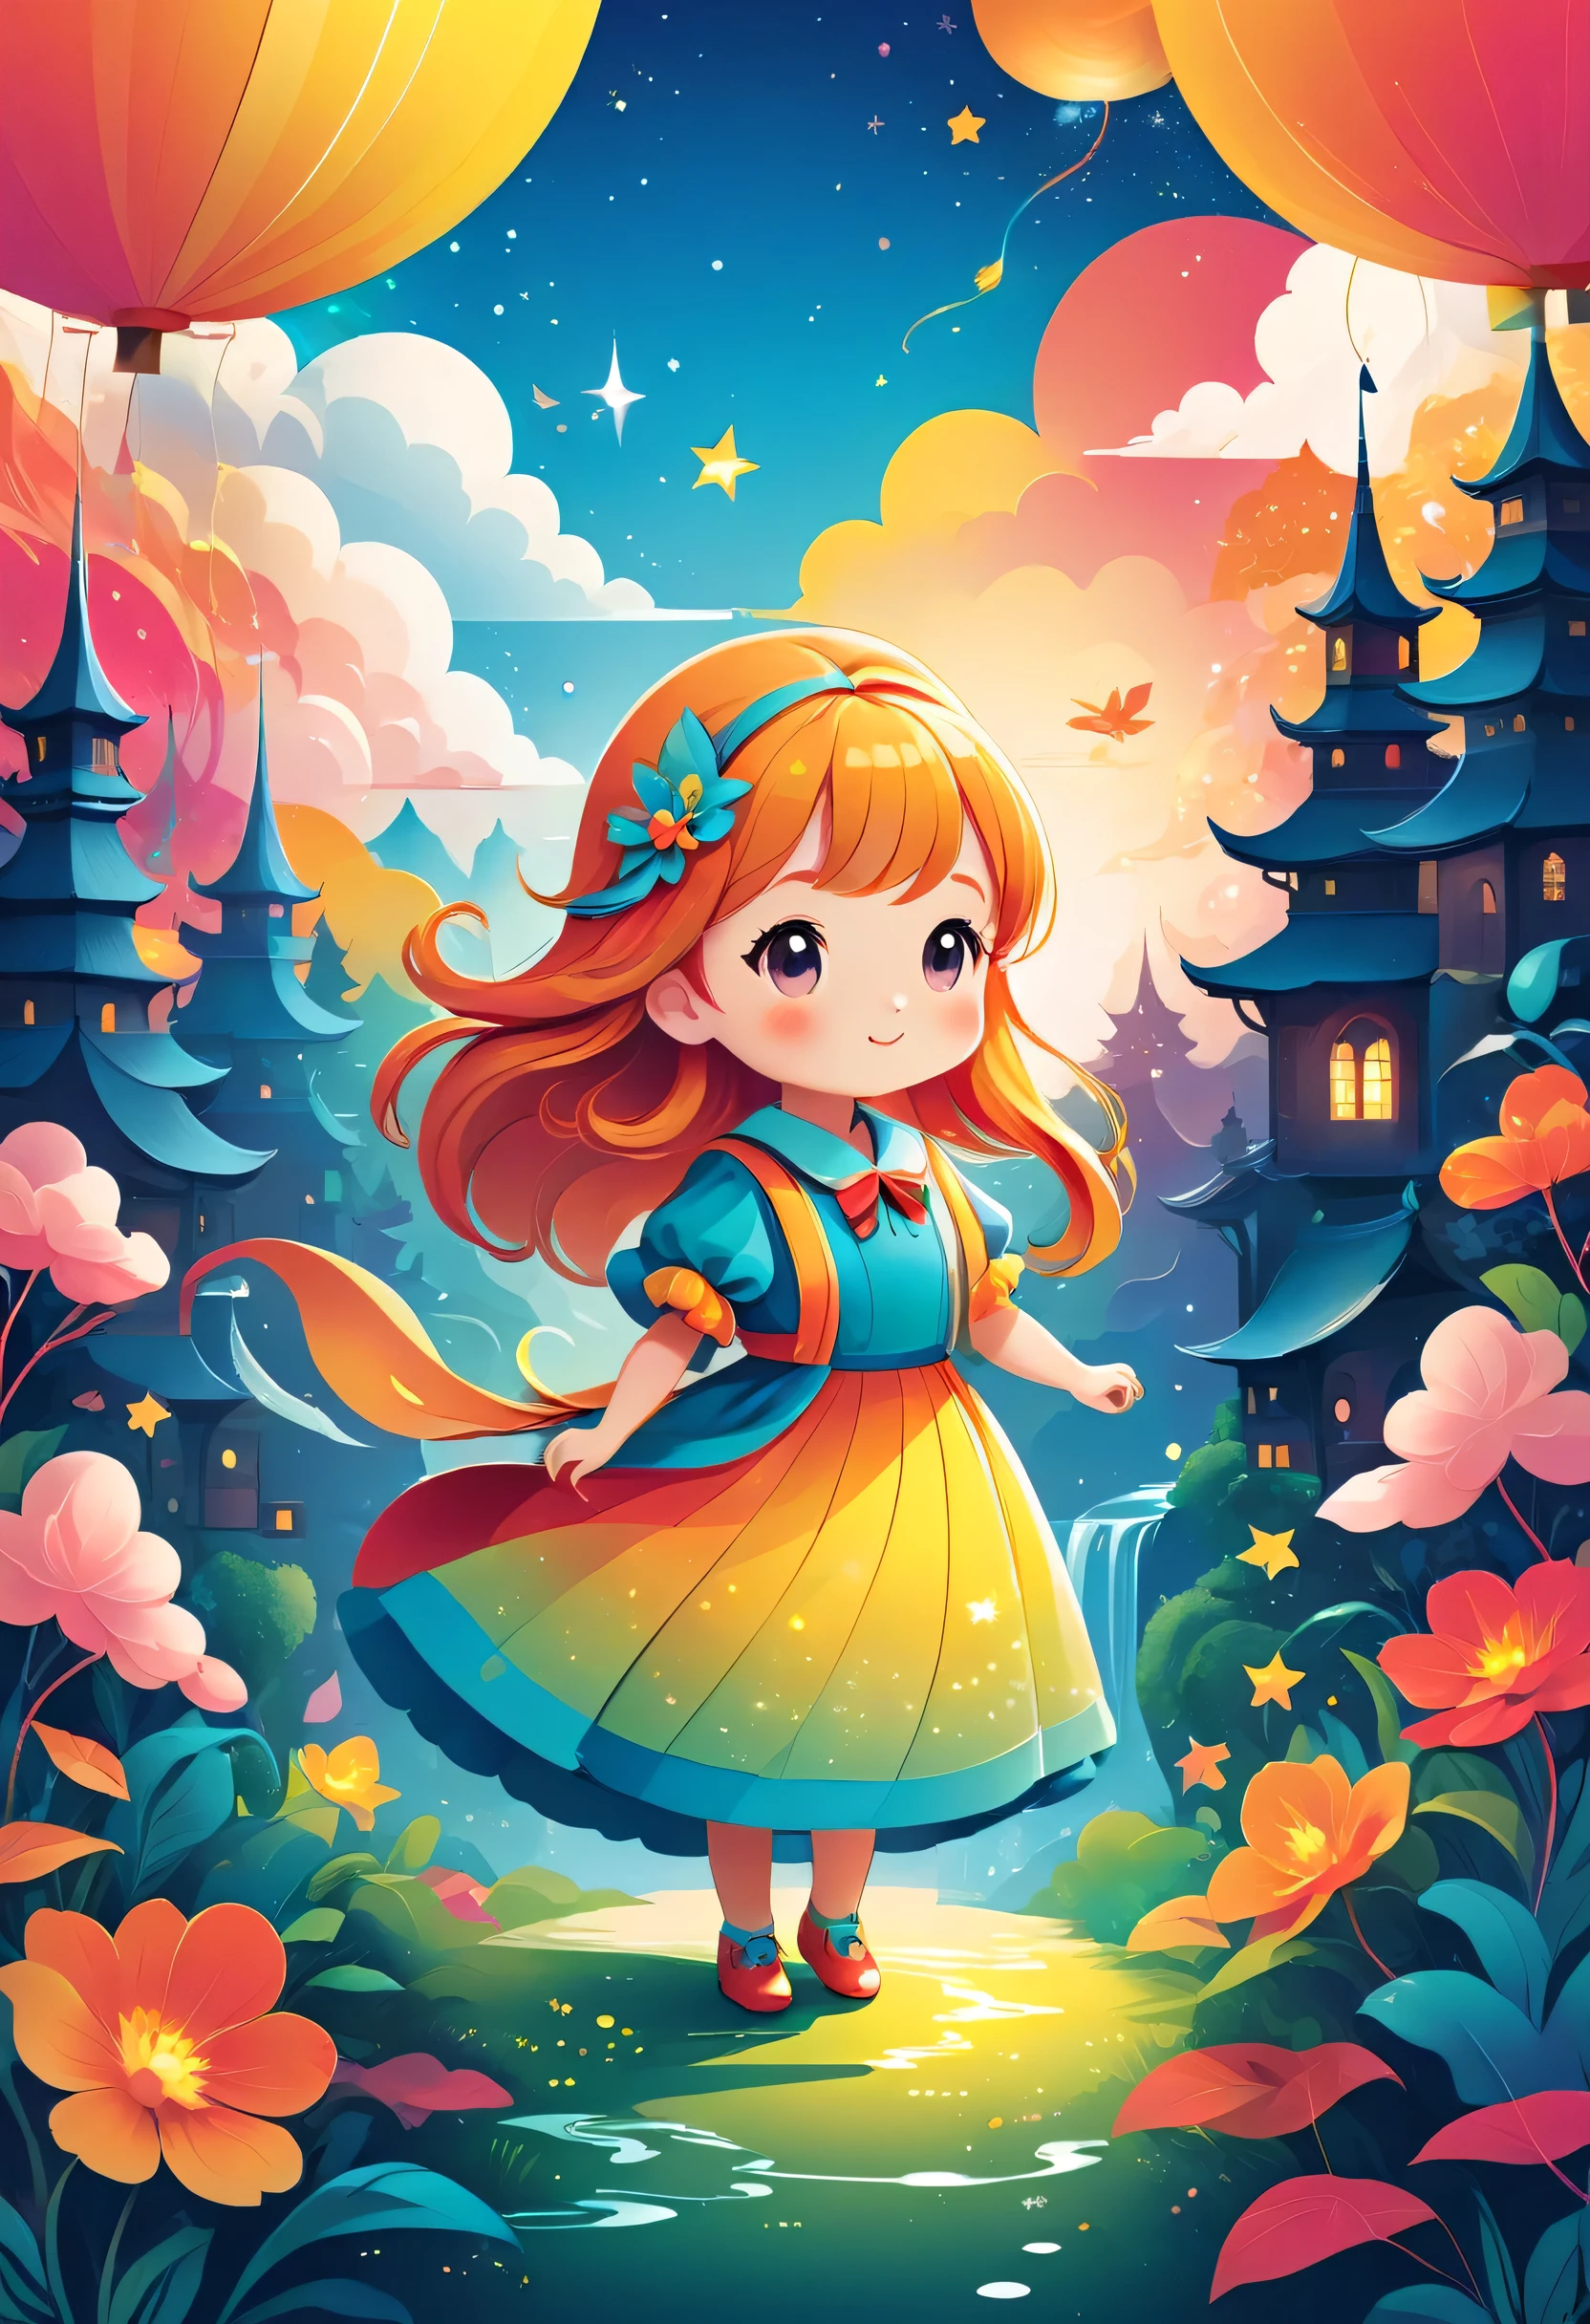 vector illustration:cute cartoon forest, null,Little Red Riding Hood, adobe illustrator,draw with thick lines,,cute,pop,Gentle color,Cast colorful spells,nice background image,masterpiece,best masterpiece,Light and shadow,draw carefully,,Bright colors,fantasy,fancy,rendering,magic element,